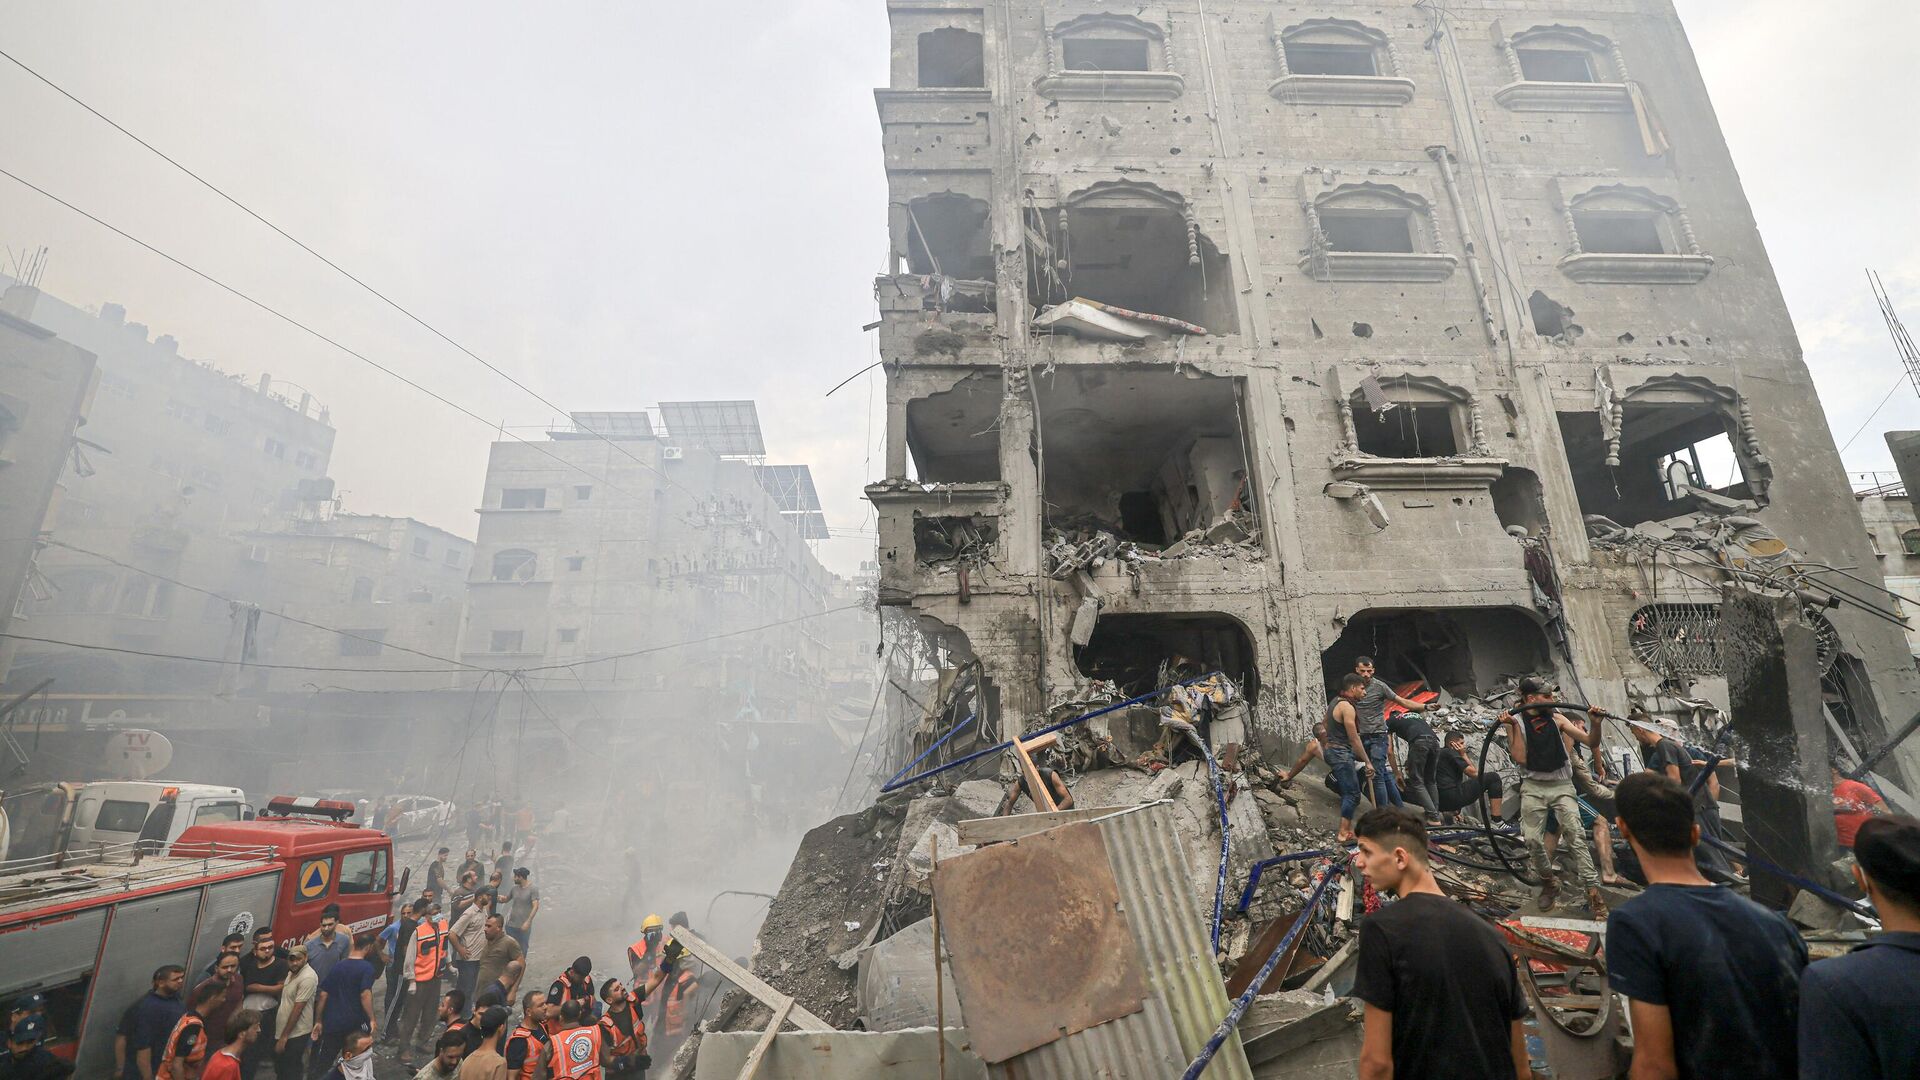 Consequences of the Israeli bombings in Gaza